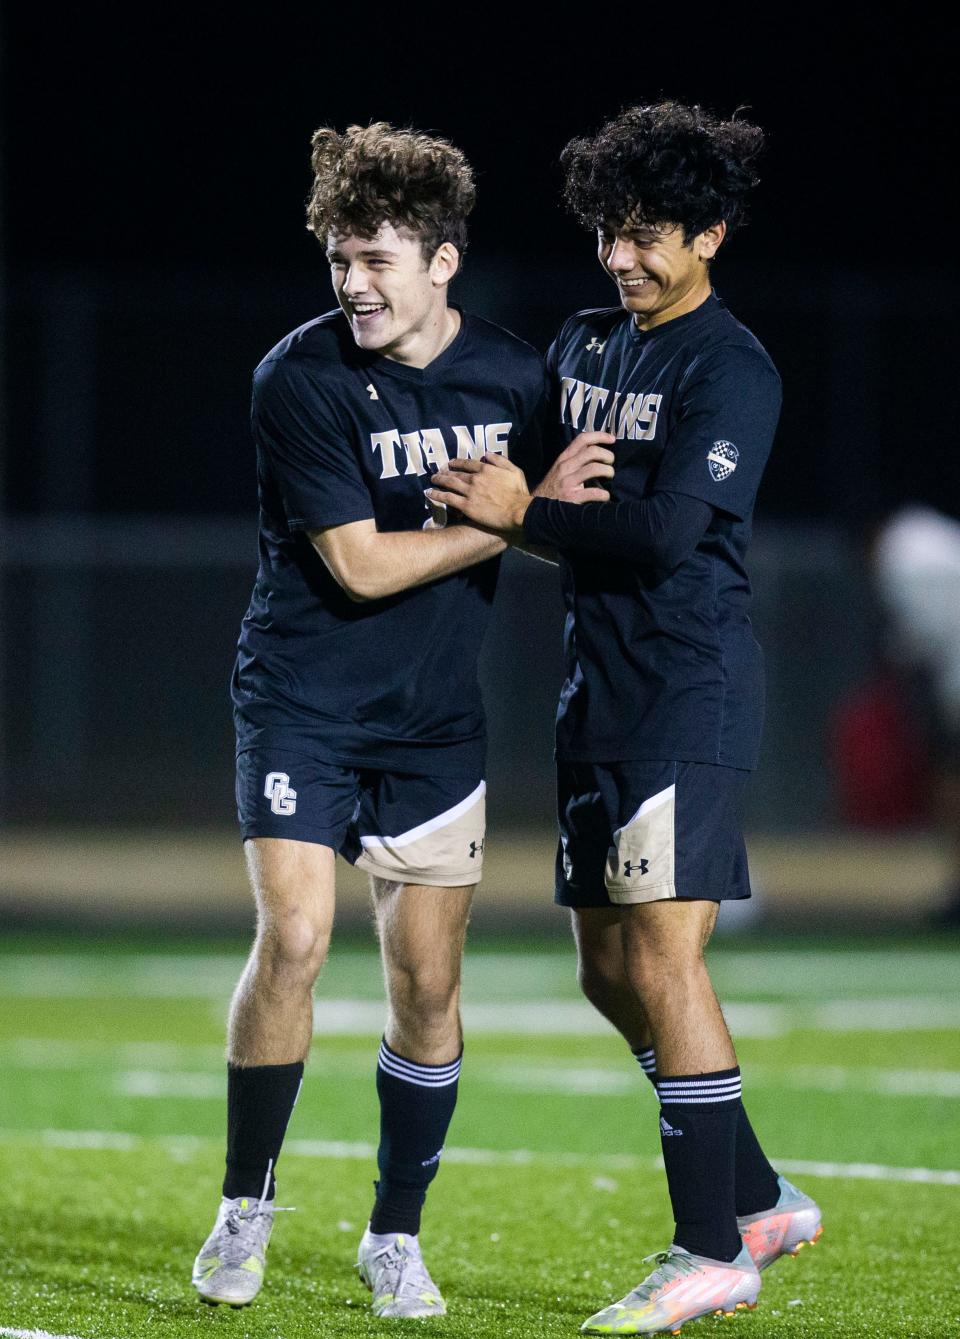 Golden Gate's Gregory Breston (22) and Golden Gate's Christian Rico (6) celebrate the team's win after the boys high school soccer game between Golden Gate and Gulf Coast on Tuesday, Jan. 18, 2022 at Golden Gate High School in Naples, Fla. 